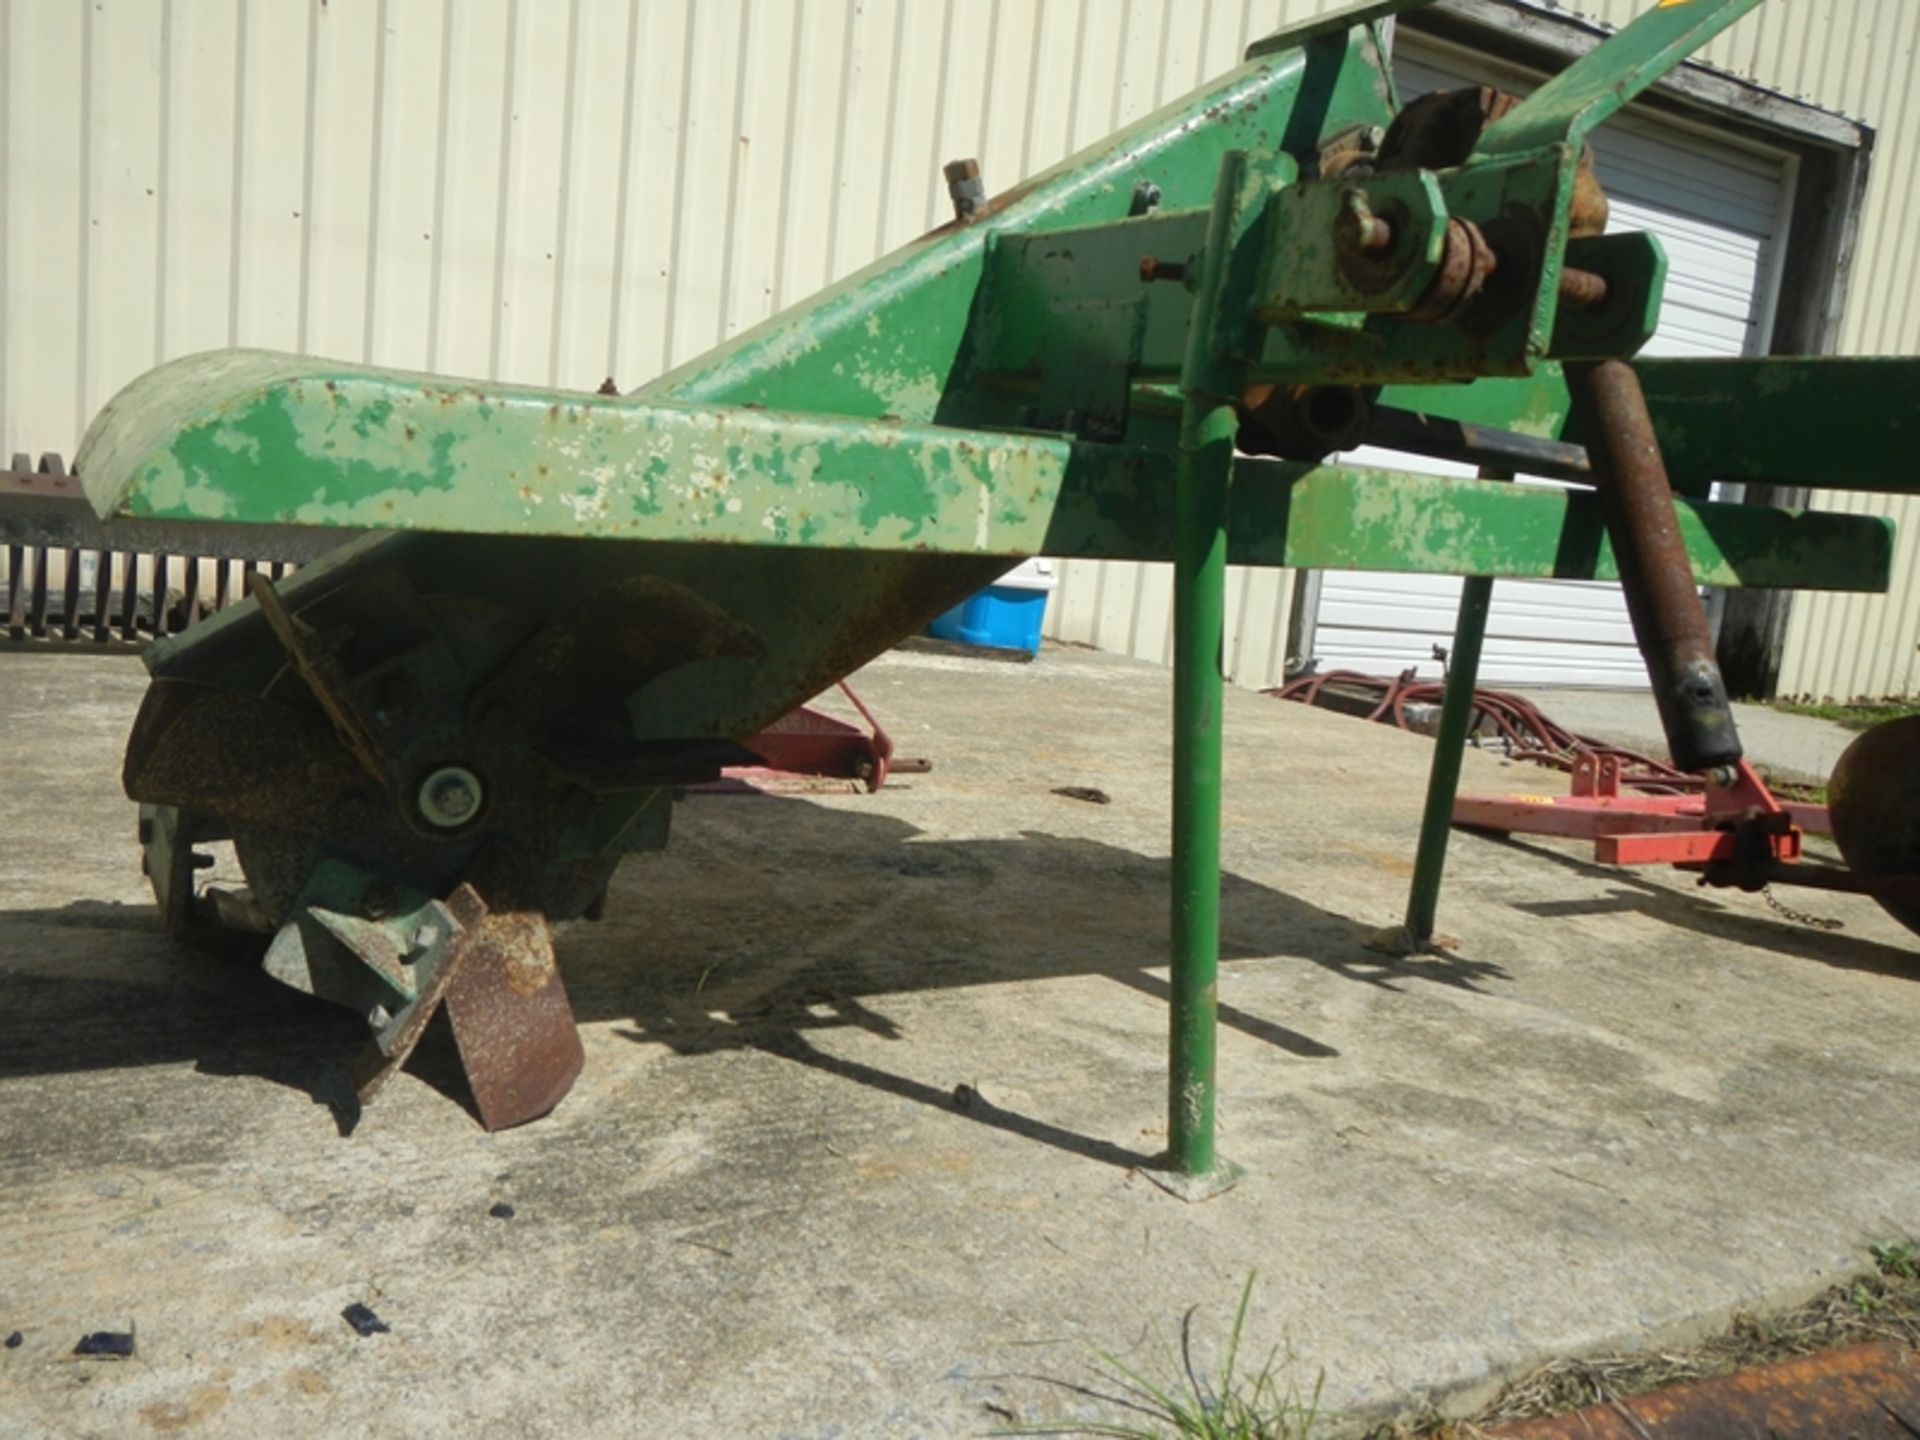 Reddick off set trencher has been modified so you can change bearings without removing bottom shaft - Image 3 of 3